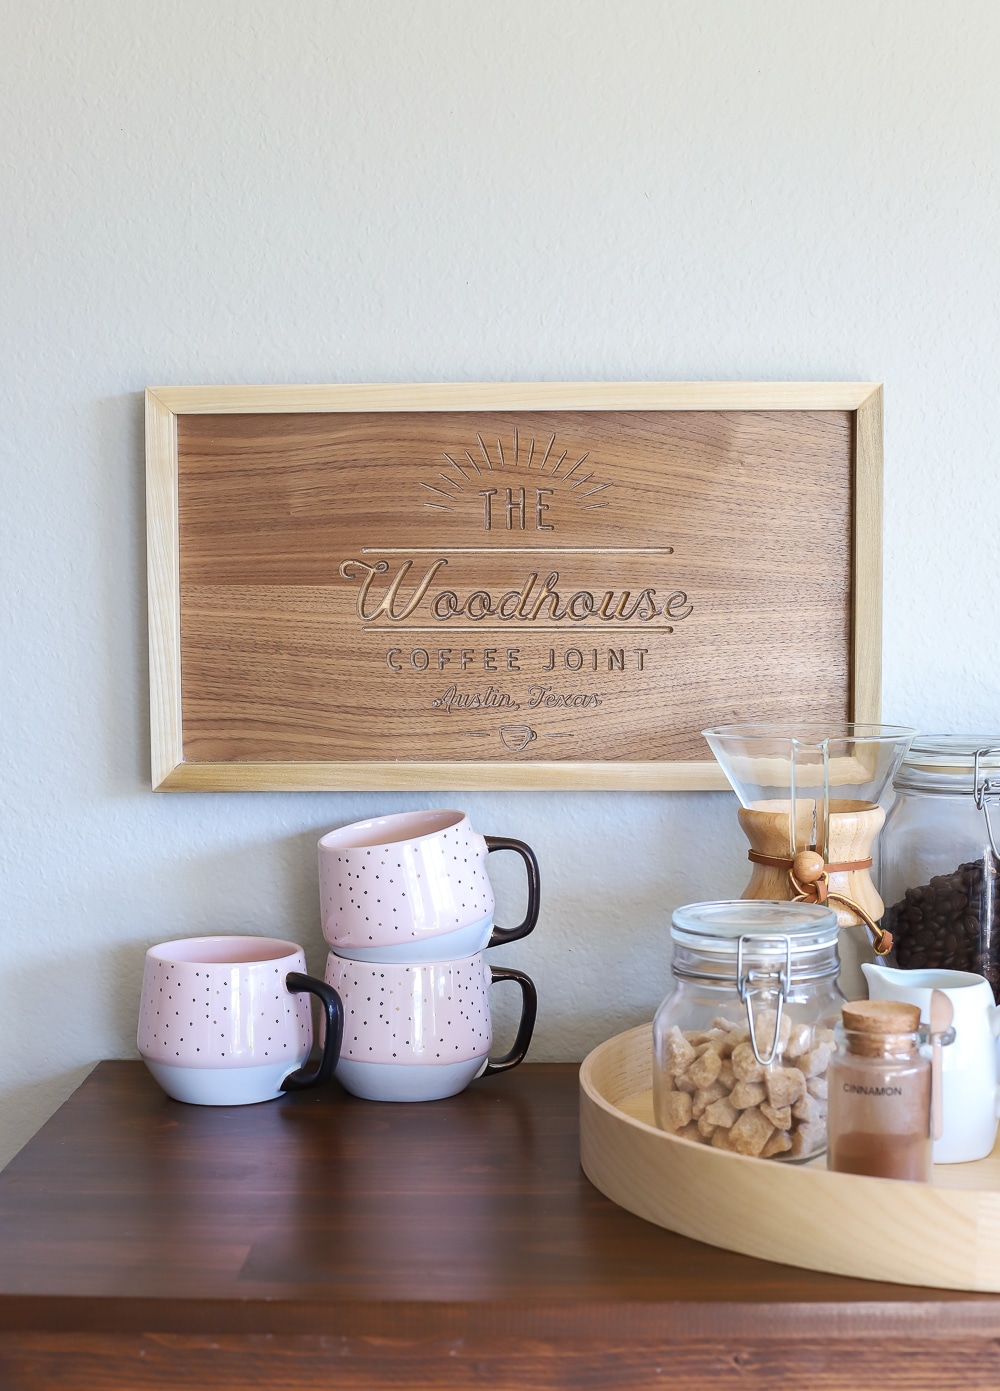 DIY Coffee Bar  Beverage Station Ideas and Moodboard - Project: DIY Our  Home